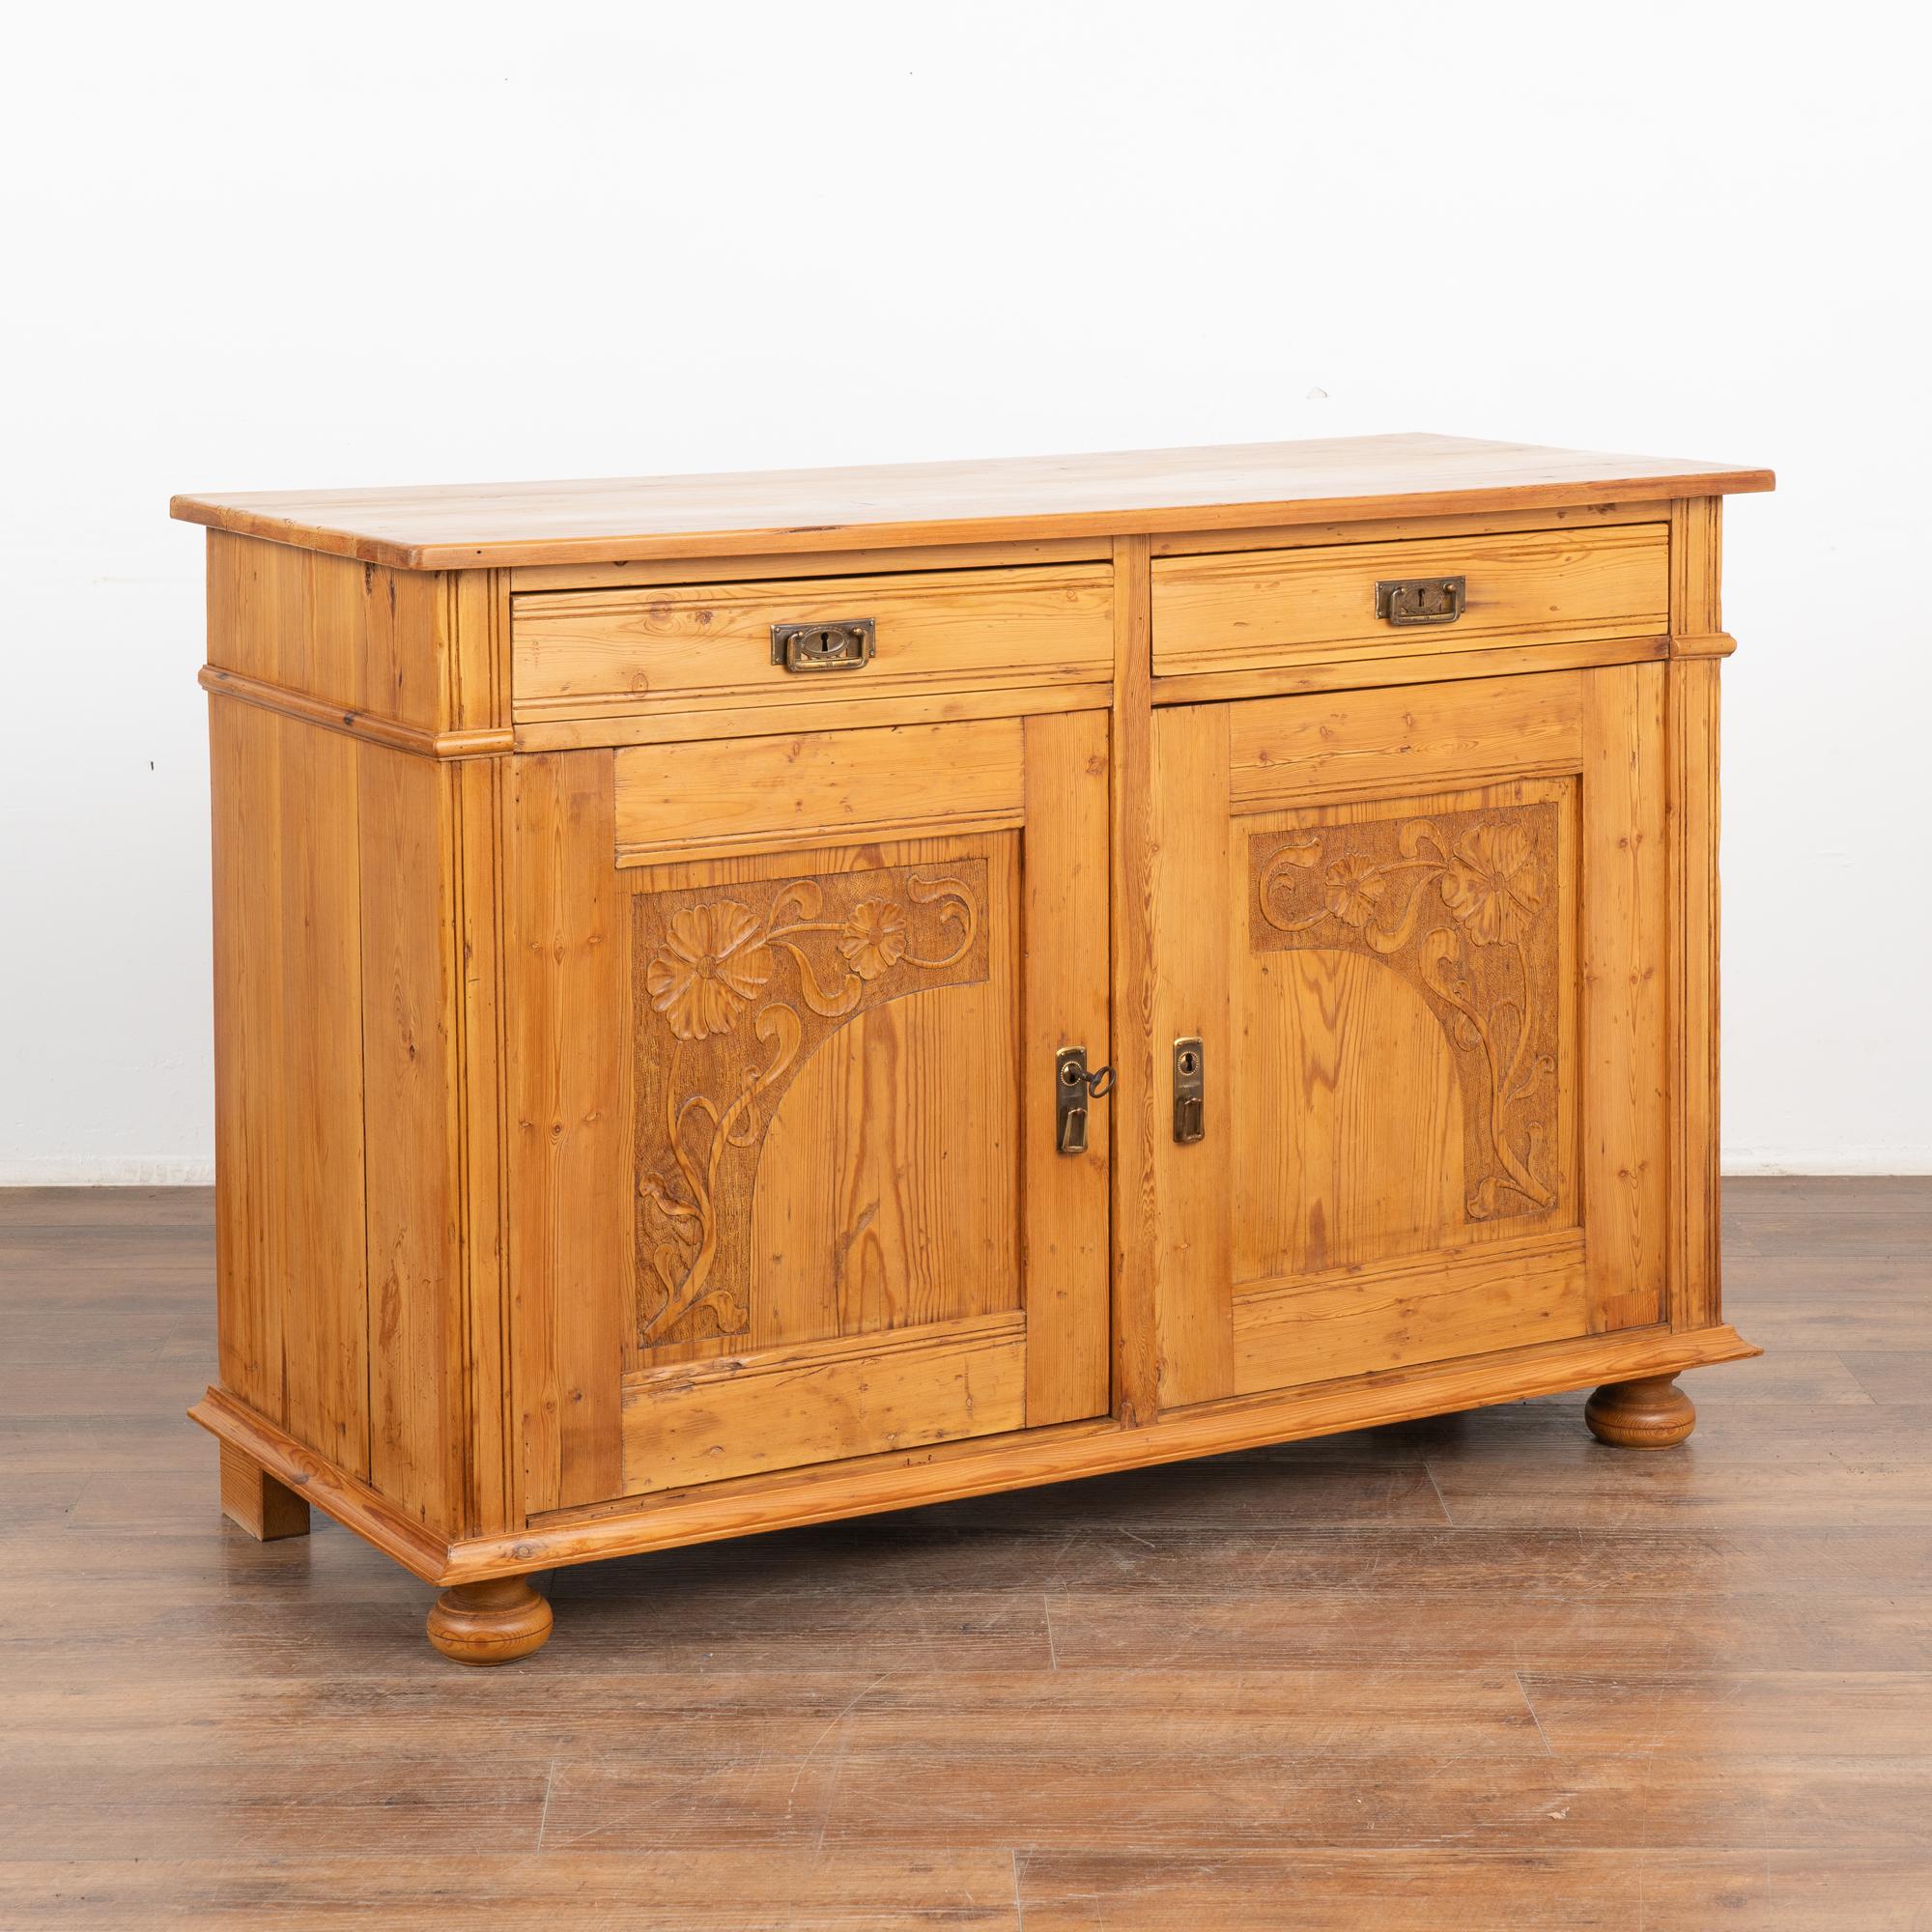 Danish pine sideboard with lovely art nouveau style floral carving along front door panels.
Restored and waxed, this cabinet has a great interior divided shelving for storage and organization.
Solid, strong and ready for use. One key included; old